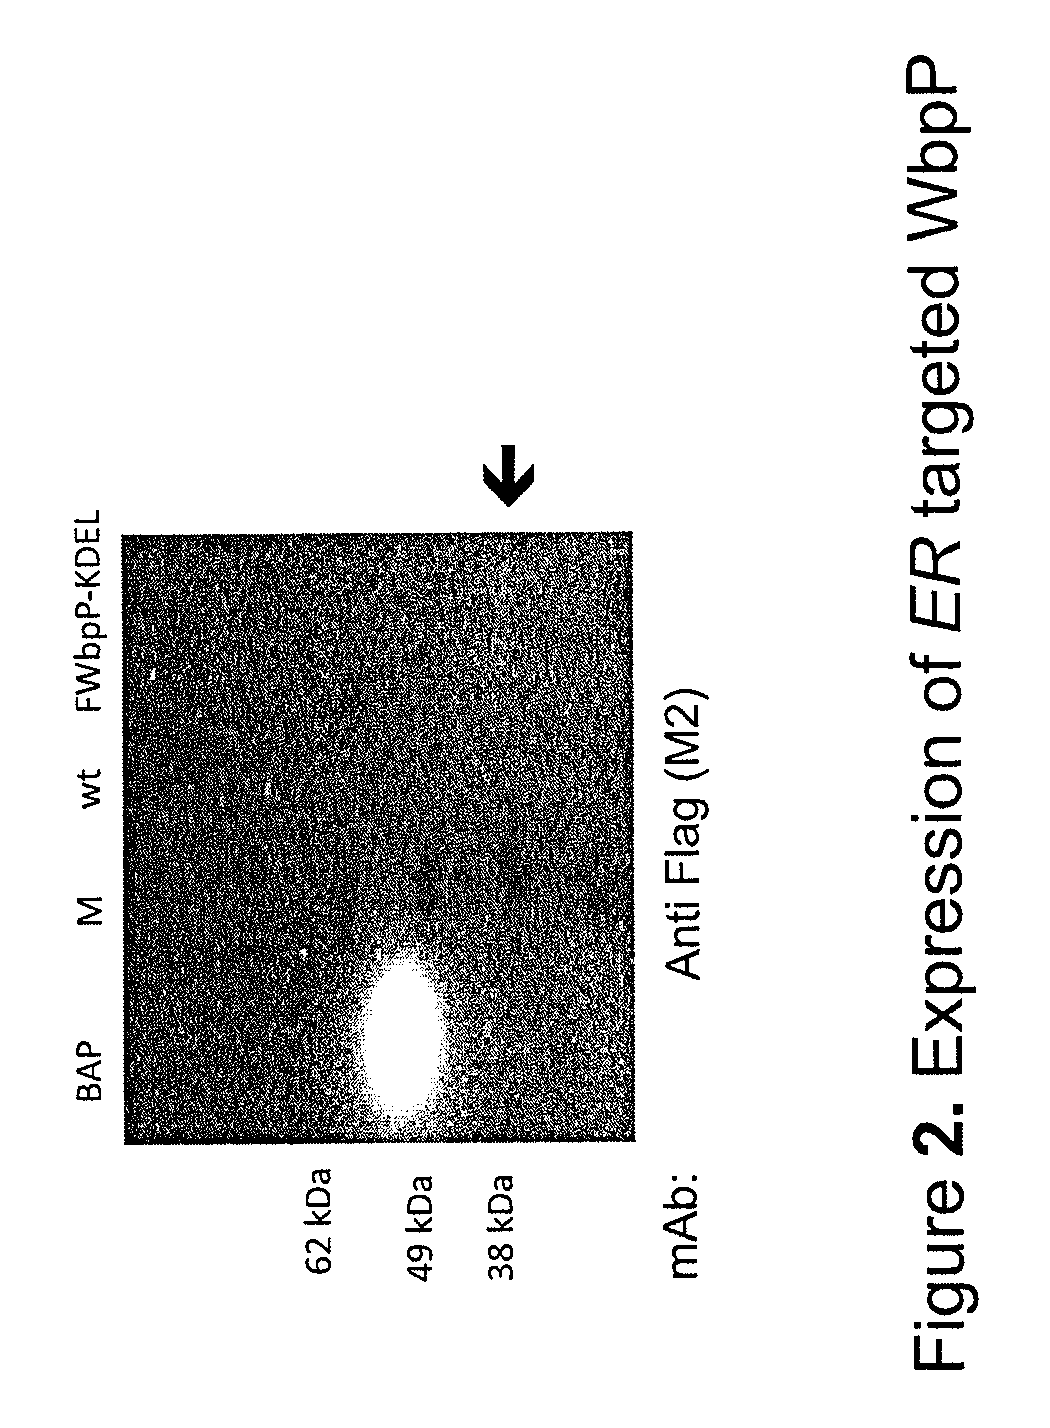 Methods for glyco-engineering plant cells for controlled human O-glycosylation